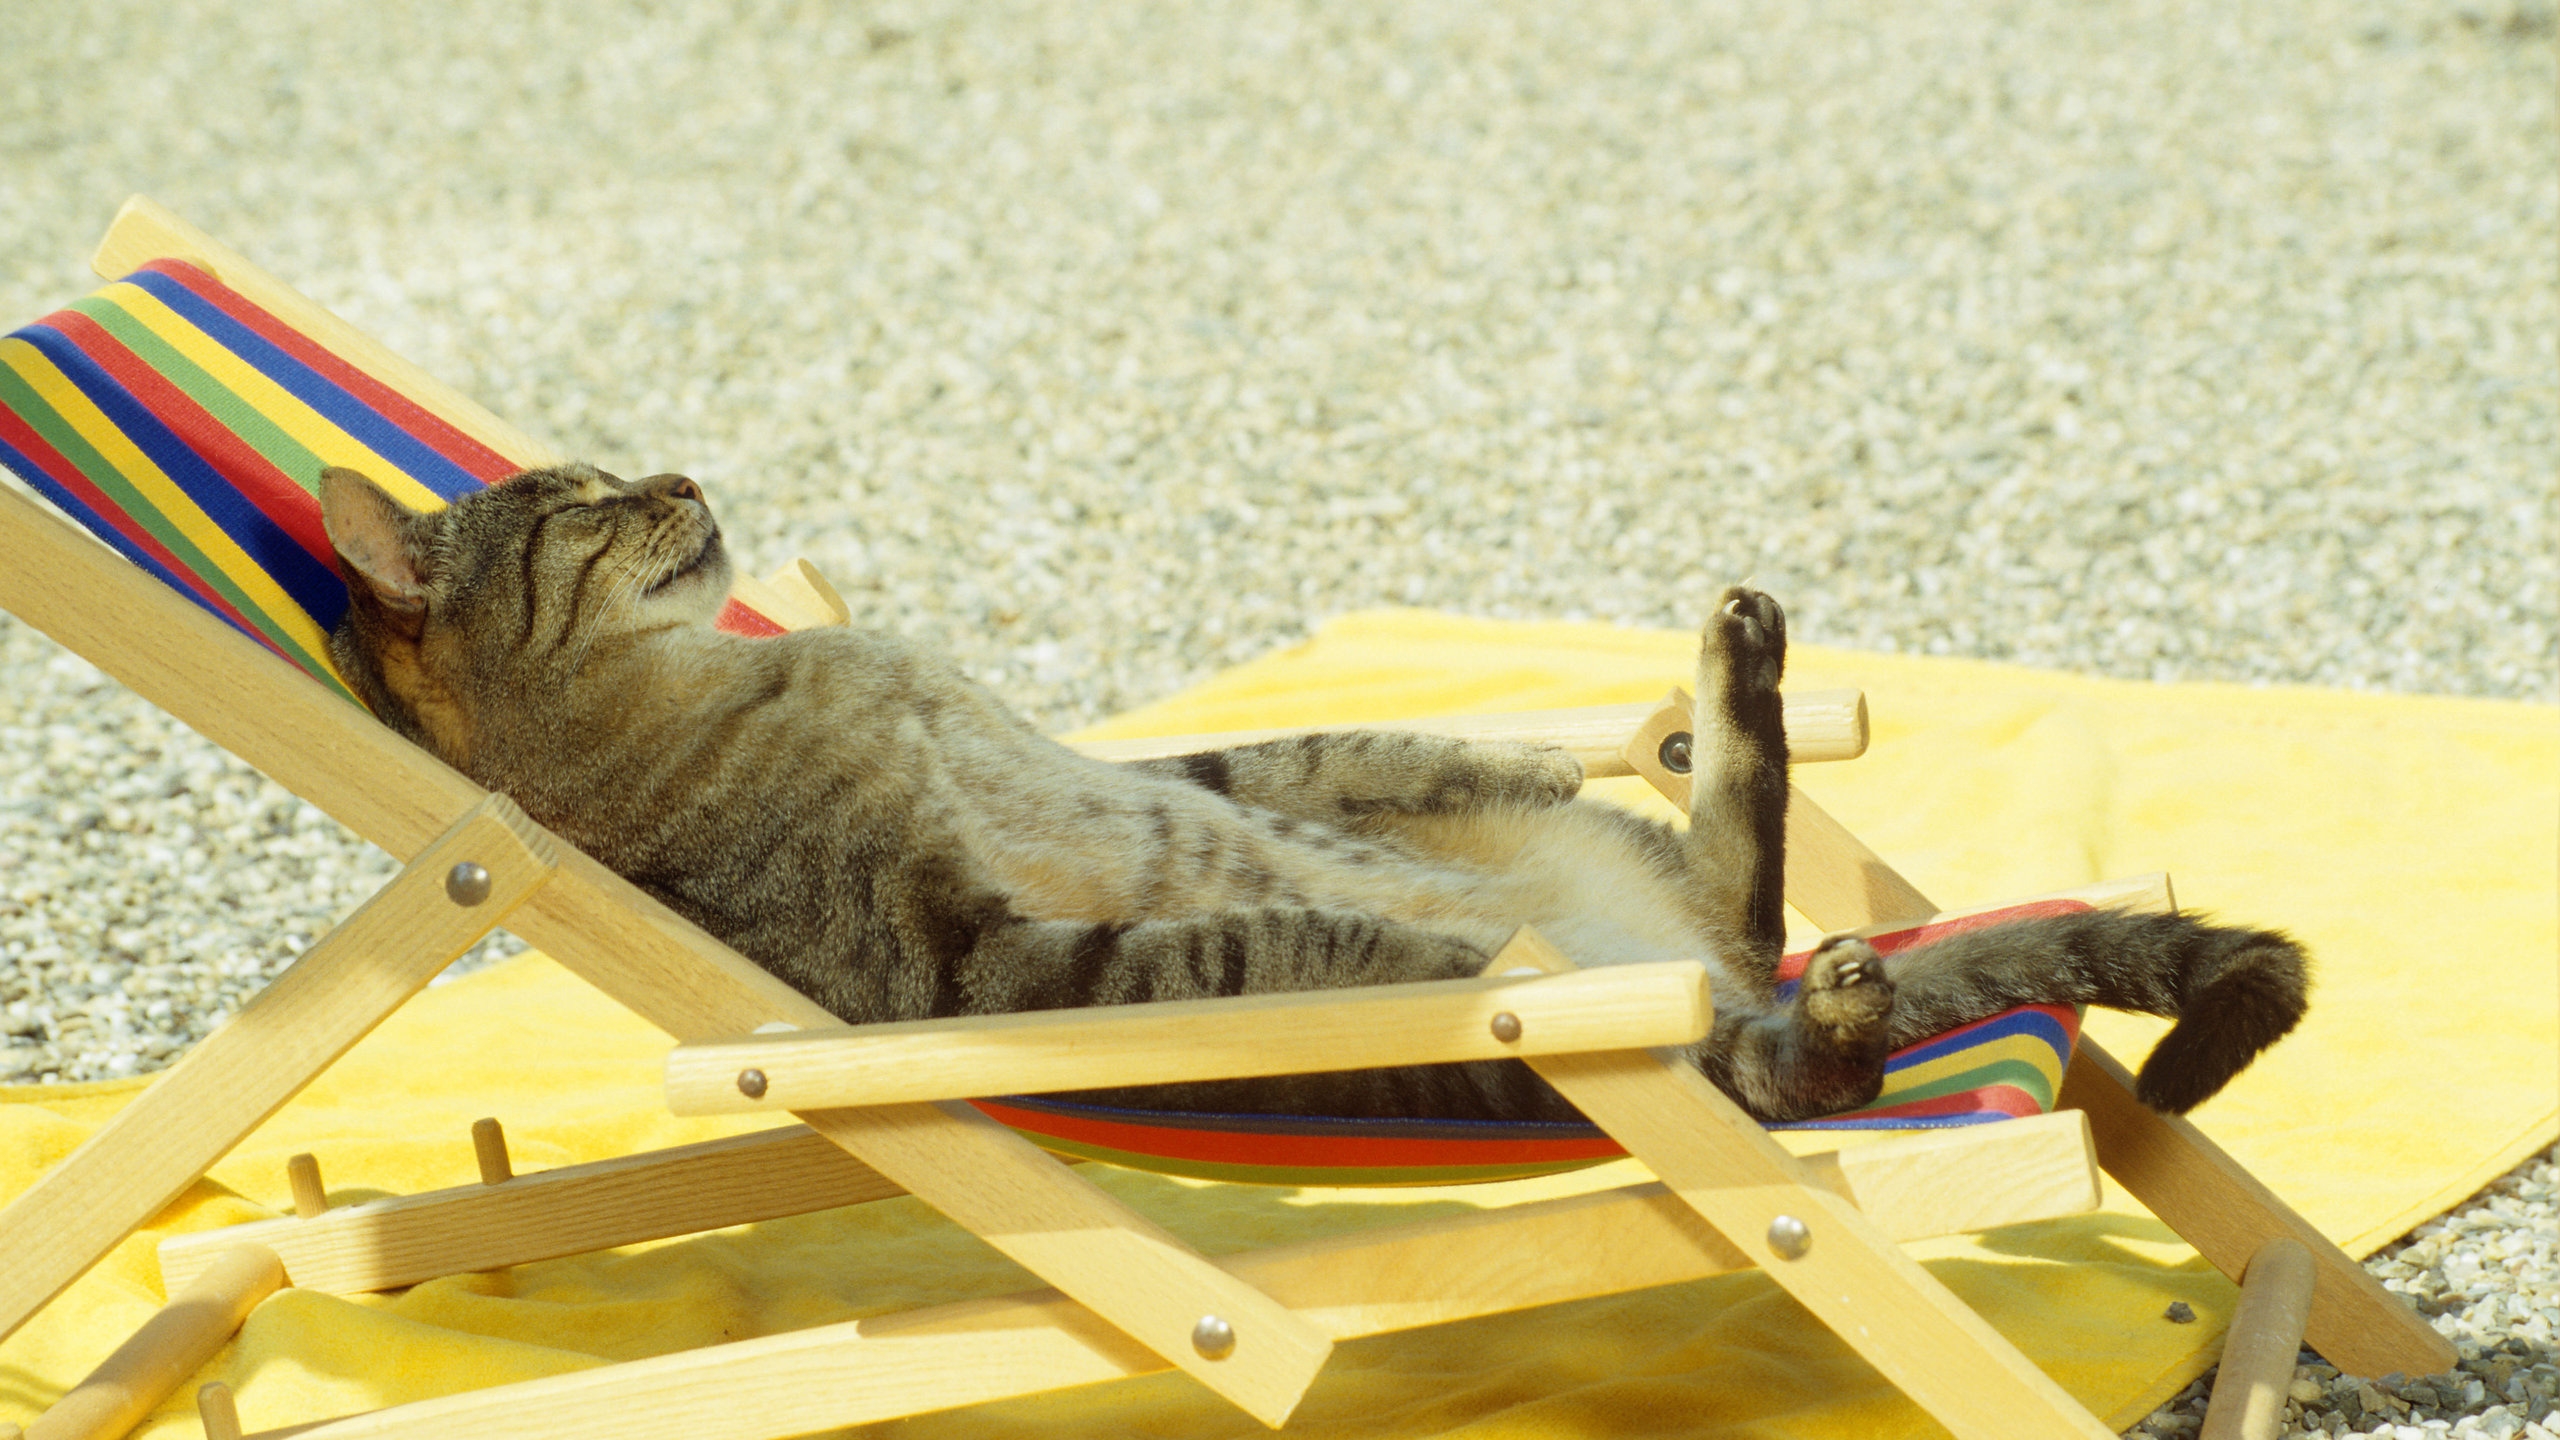 Cat relaxing on lounge chair for 2560x1440 HDTV resolution